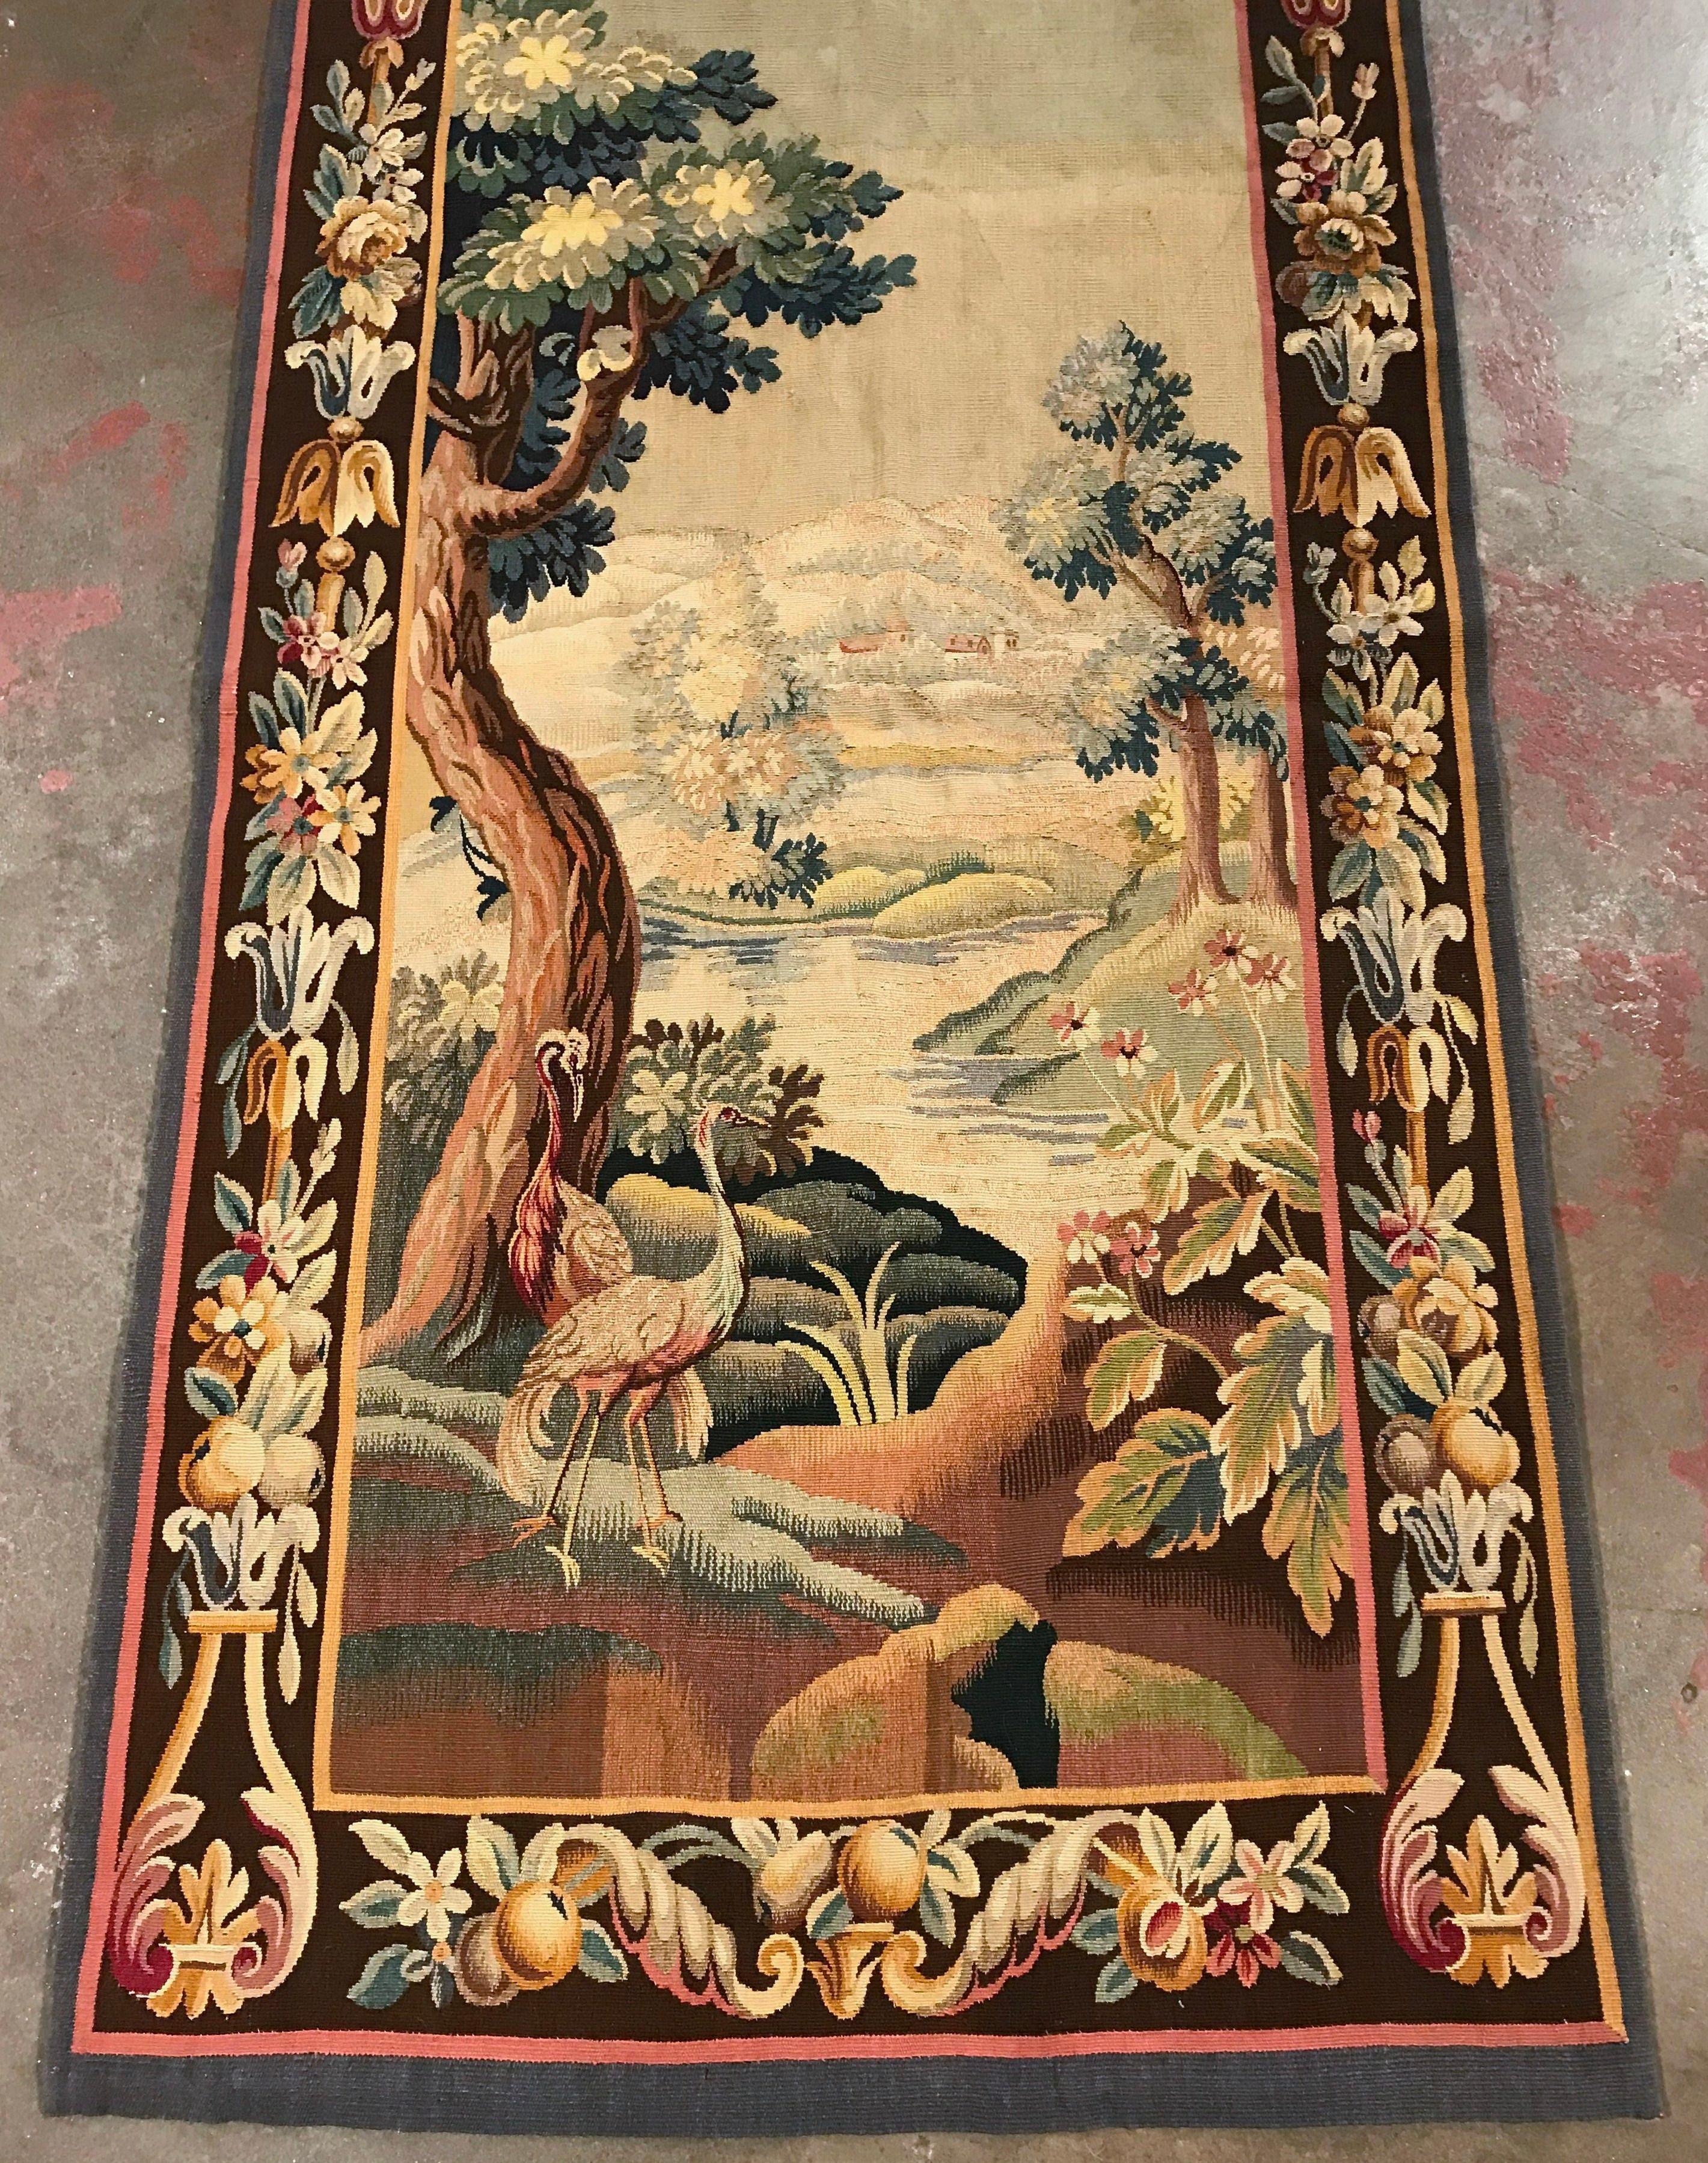 Hand-Woven 19th Century French Hand Woven Aubusson Verdure Tapestry with Bird and Foliage